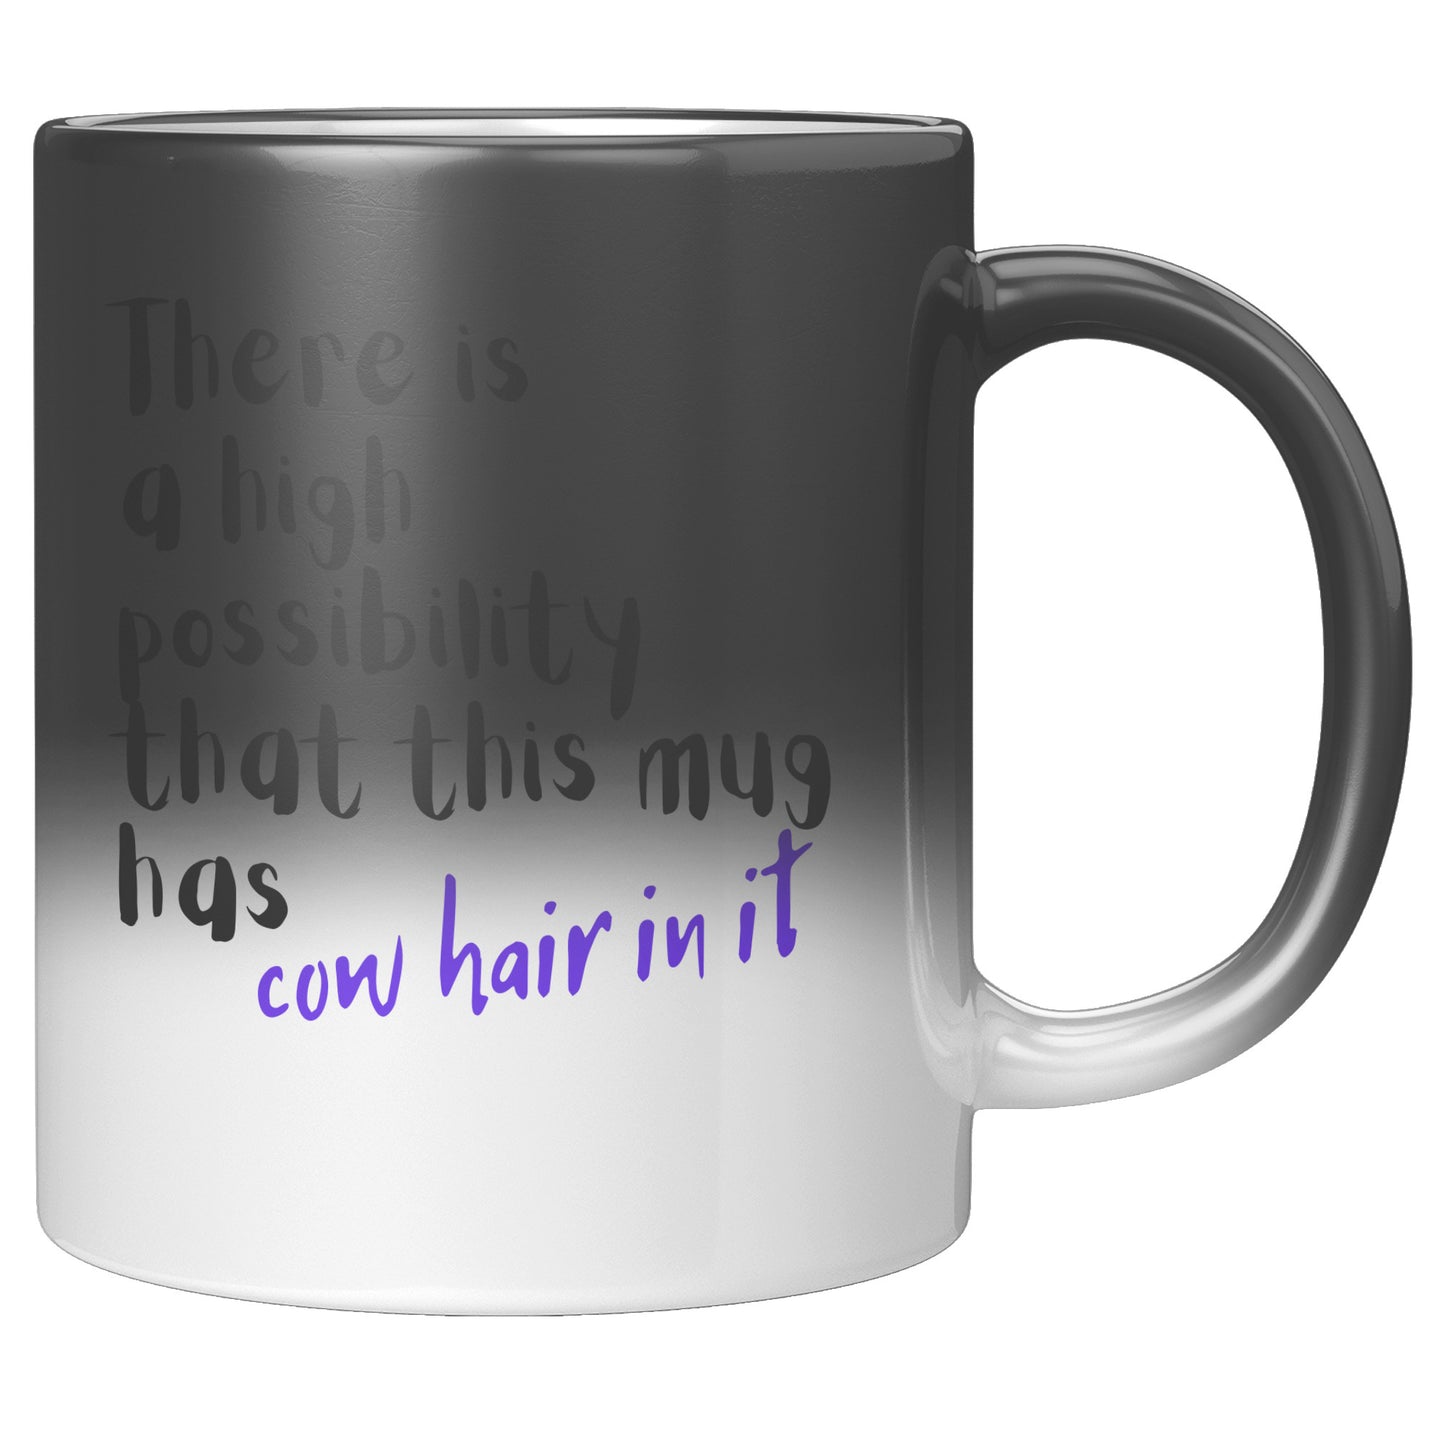 Comical Mug for the Cow Lover that also Loves Coffee as Well